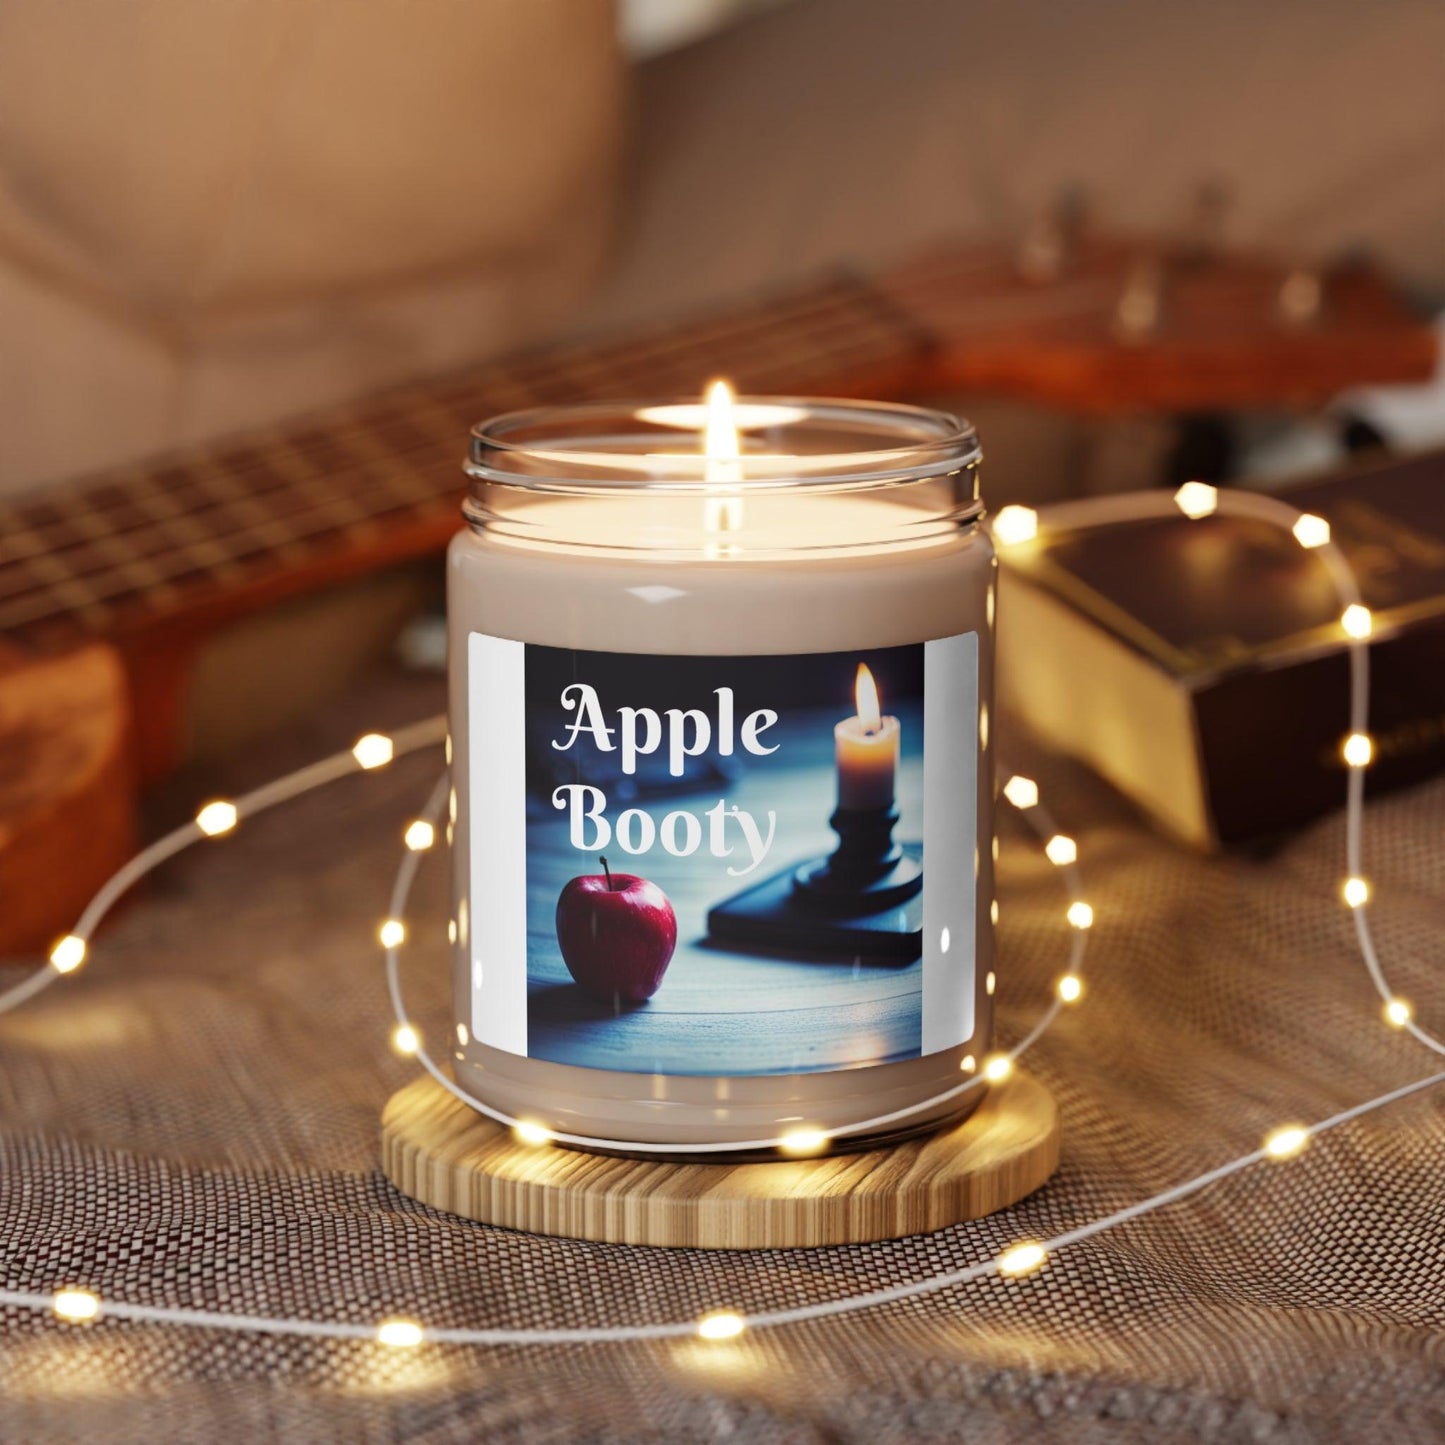 Apple Booty Candle - Captain's Quarters